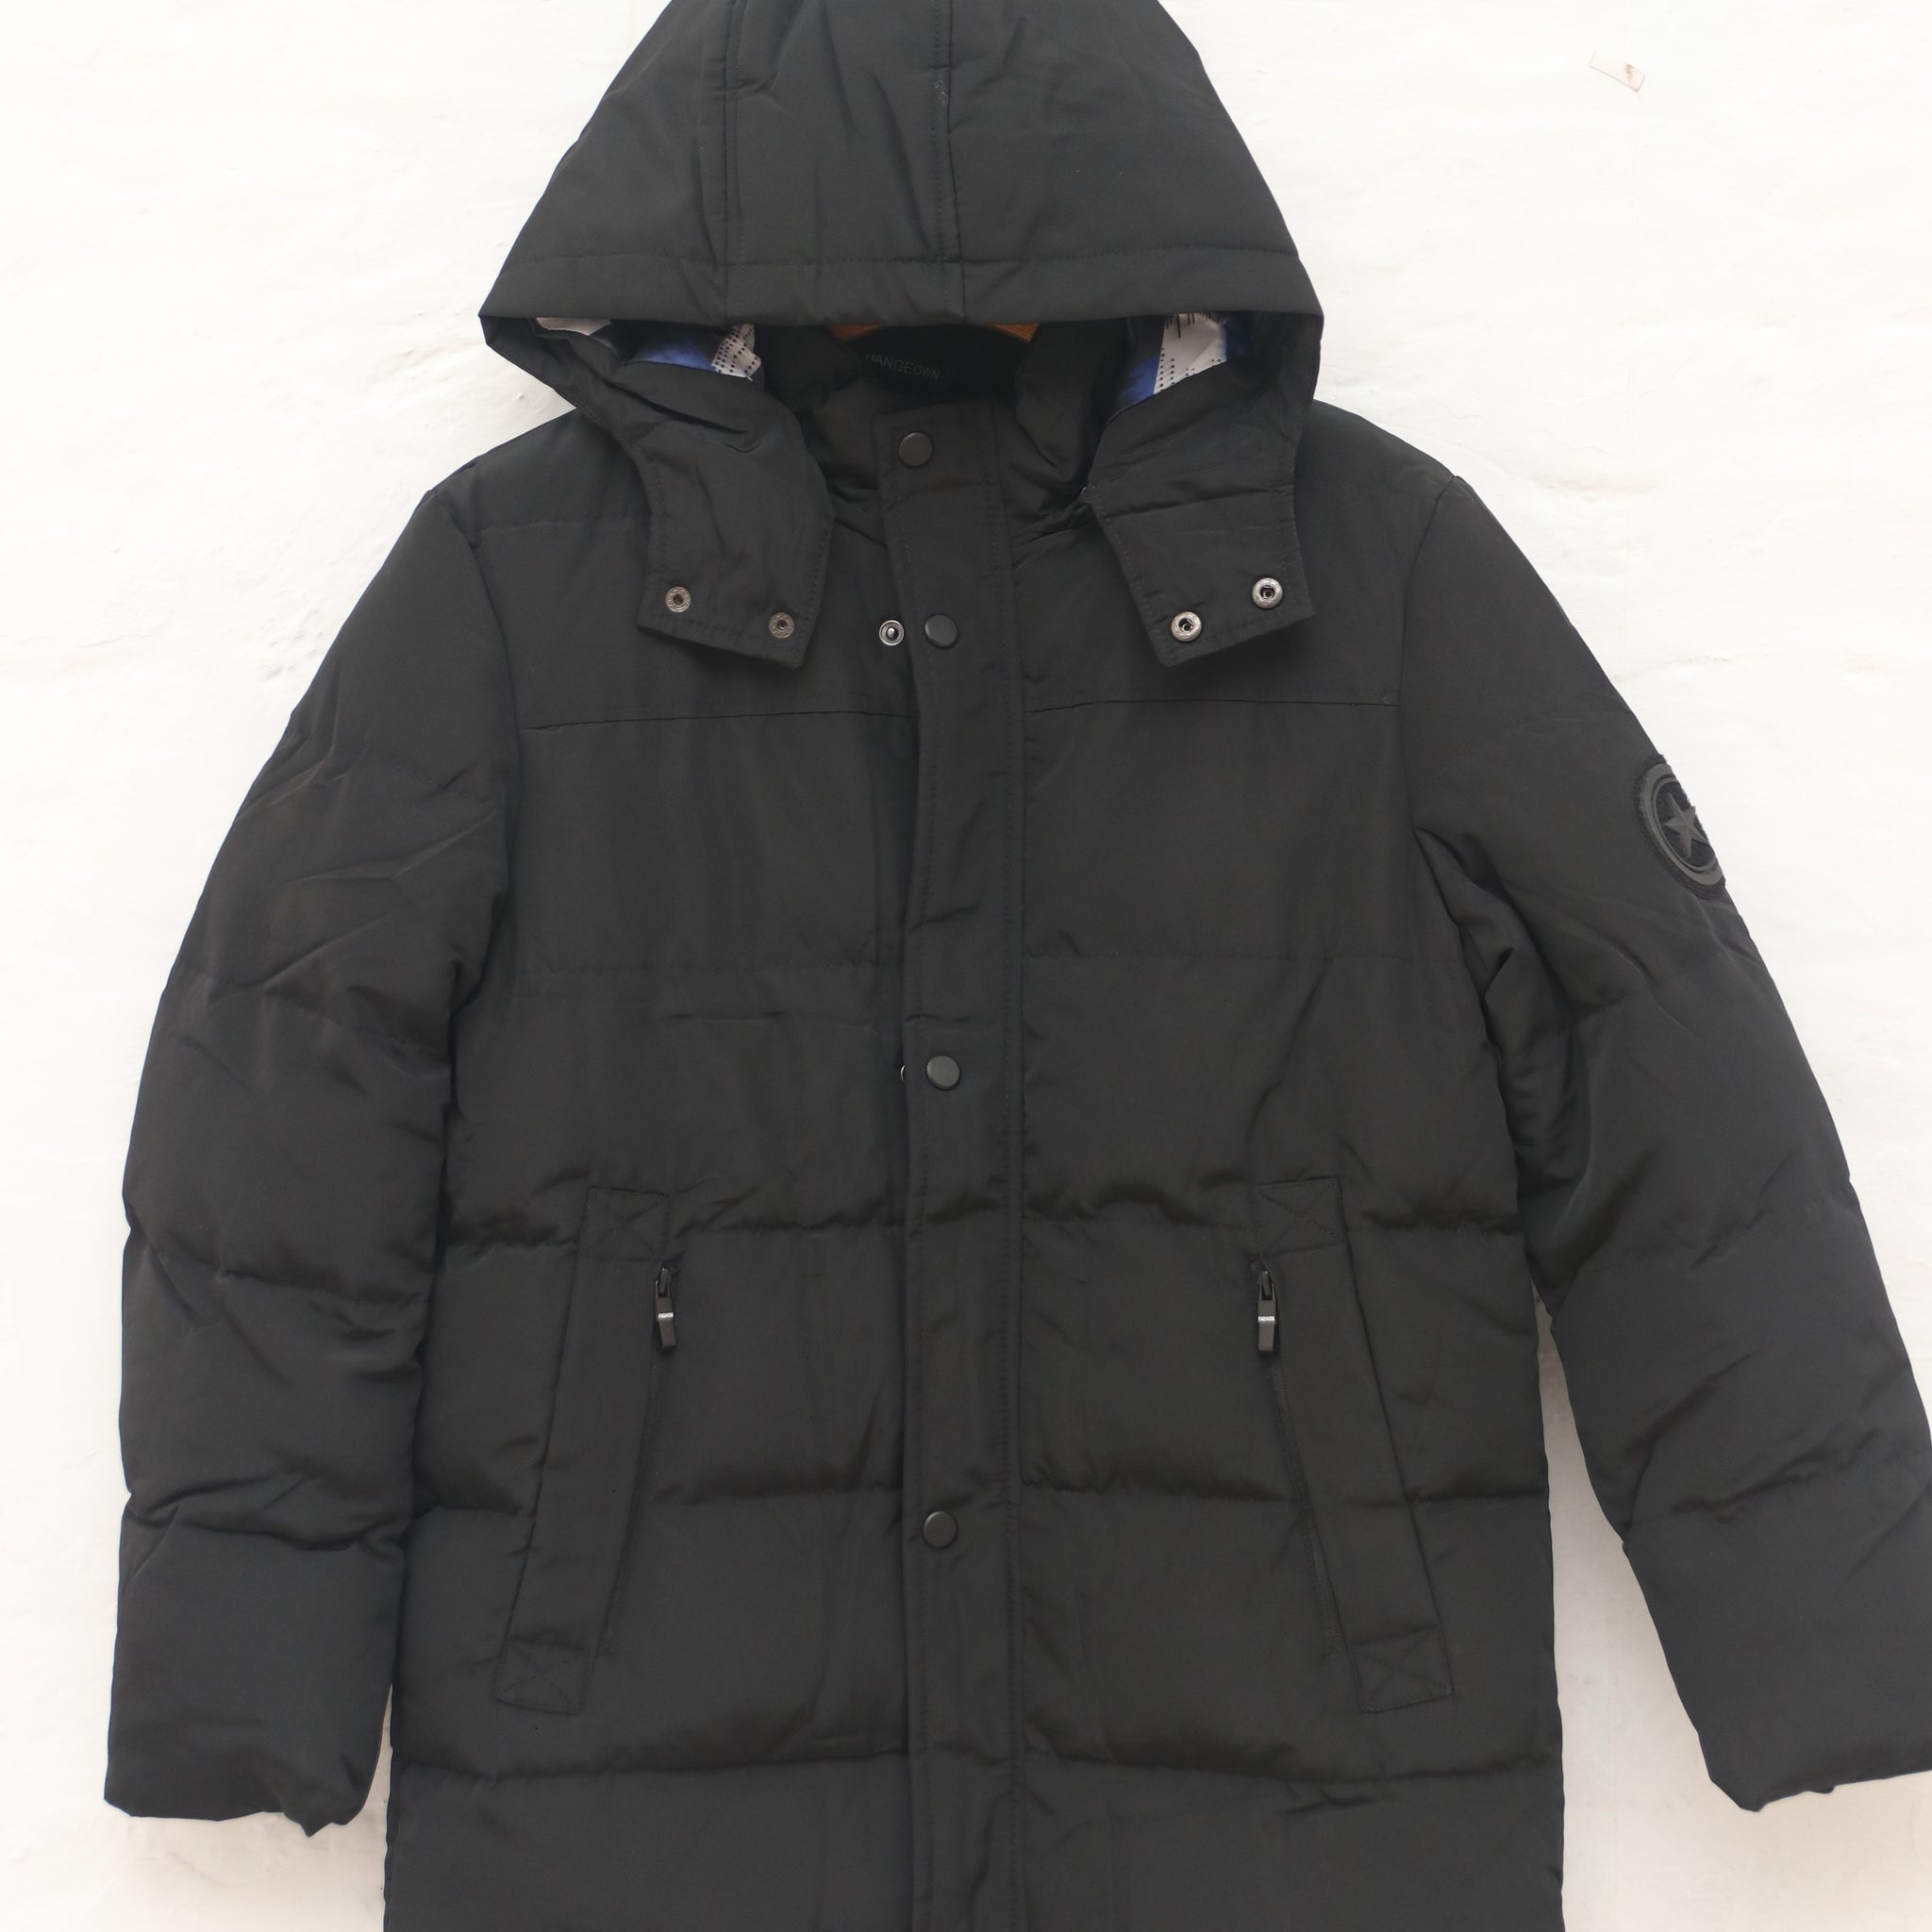 Heating Jacket (With Power Modes) 075